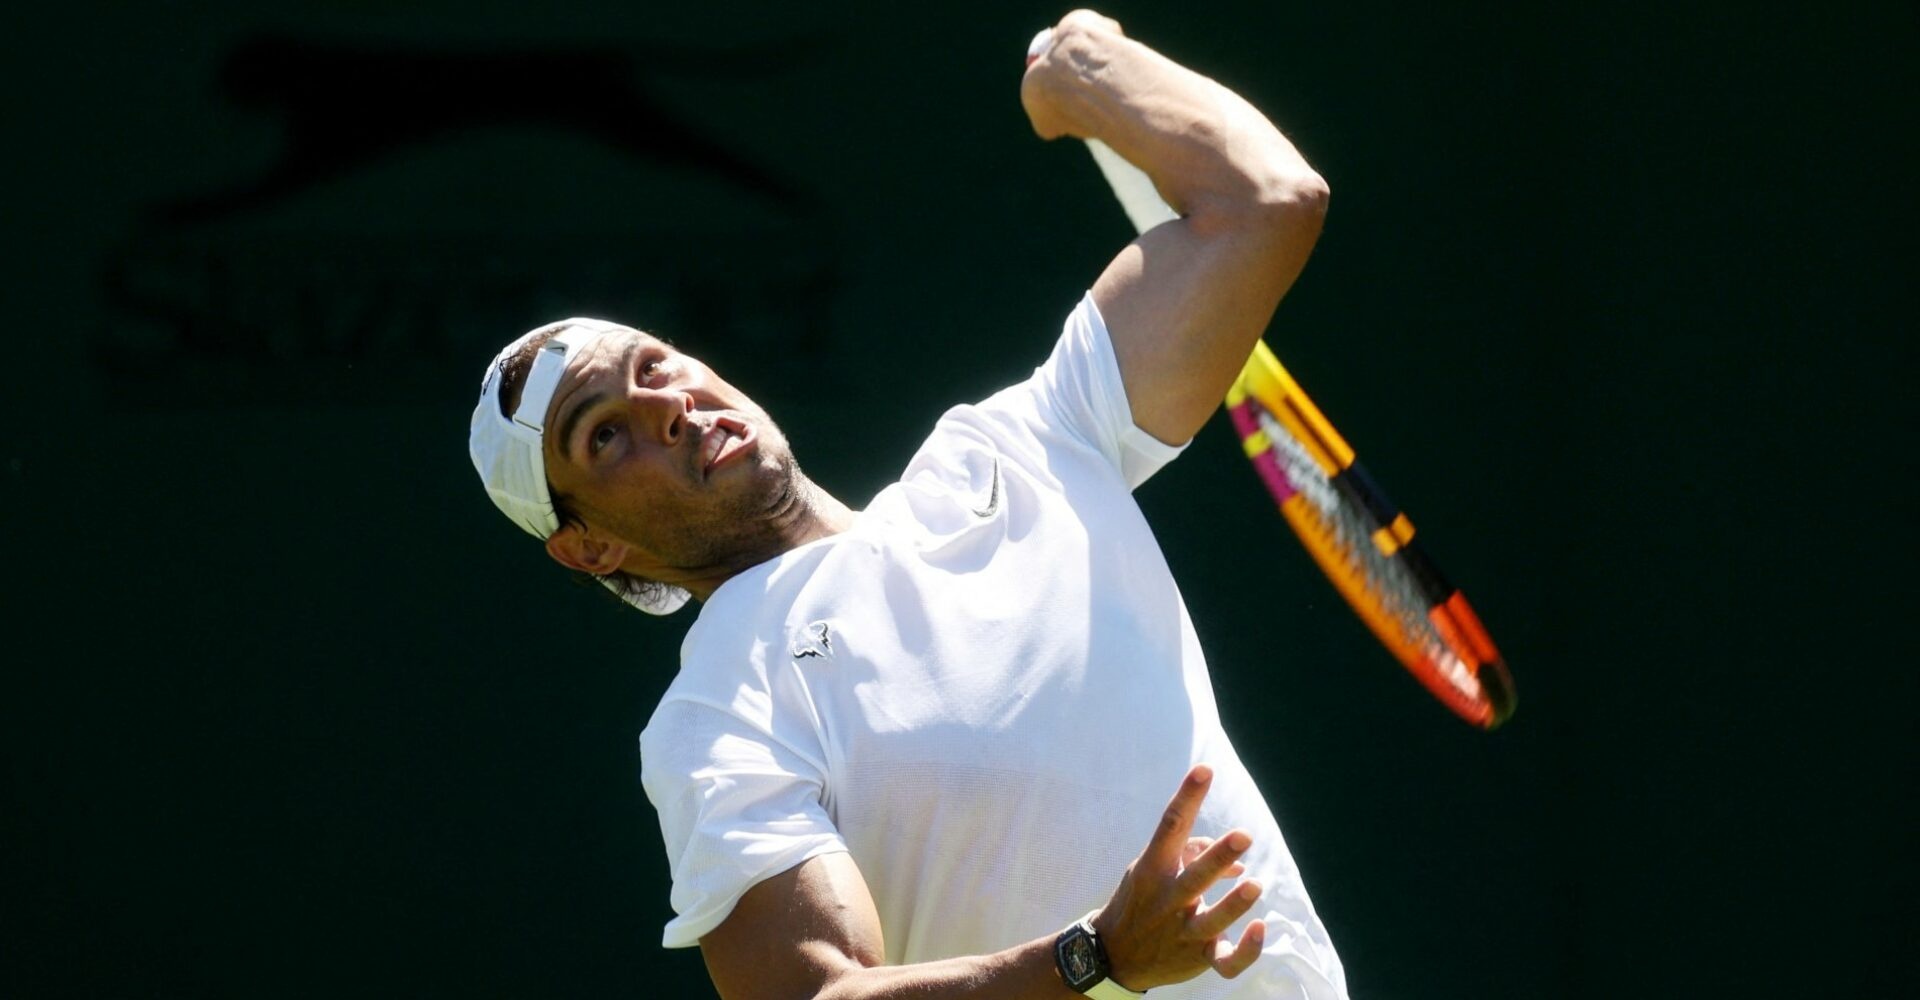 Nadal defeats Wawrinka in the Hurlingham exhibition match to demonstrate his feelings